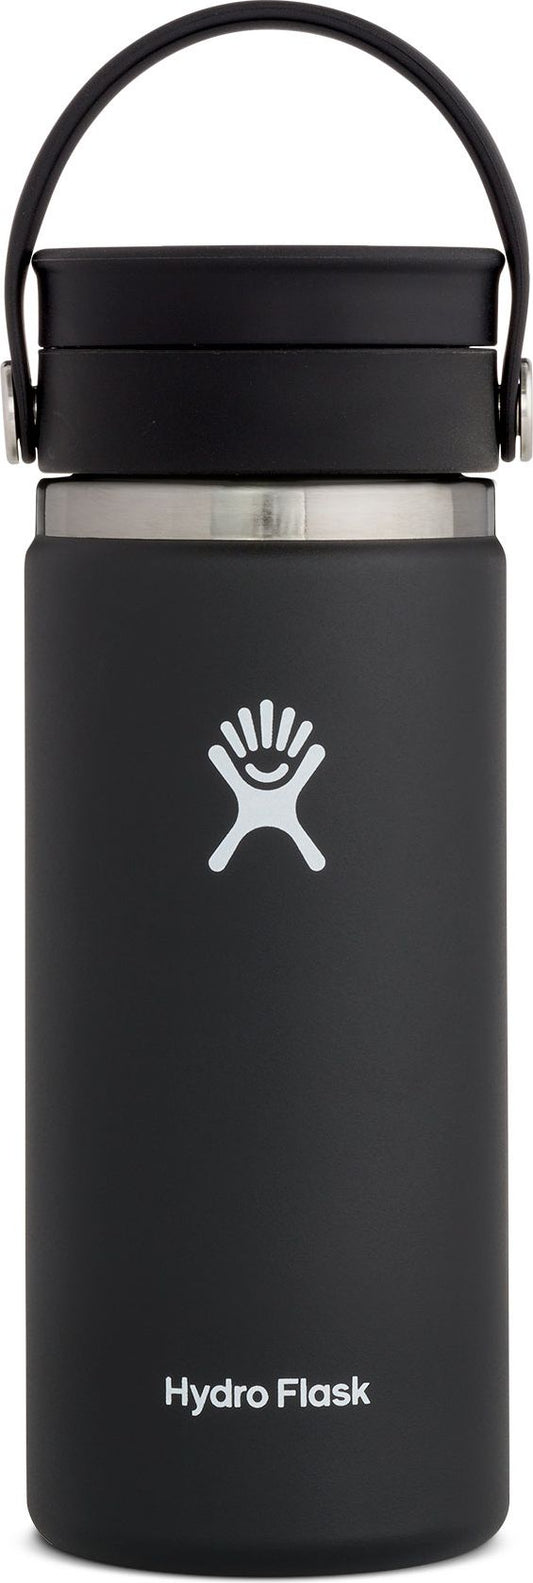 Hydro Flask Accessories 16oz Wide Mouth Flexible Sip Black